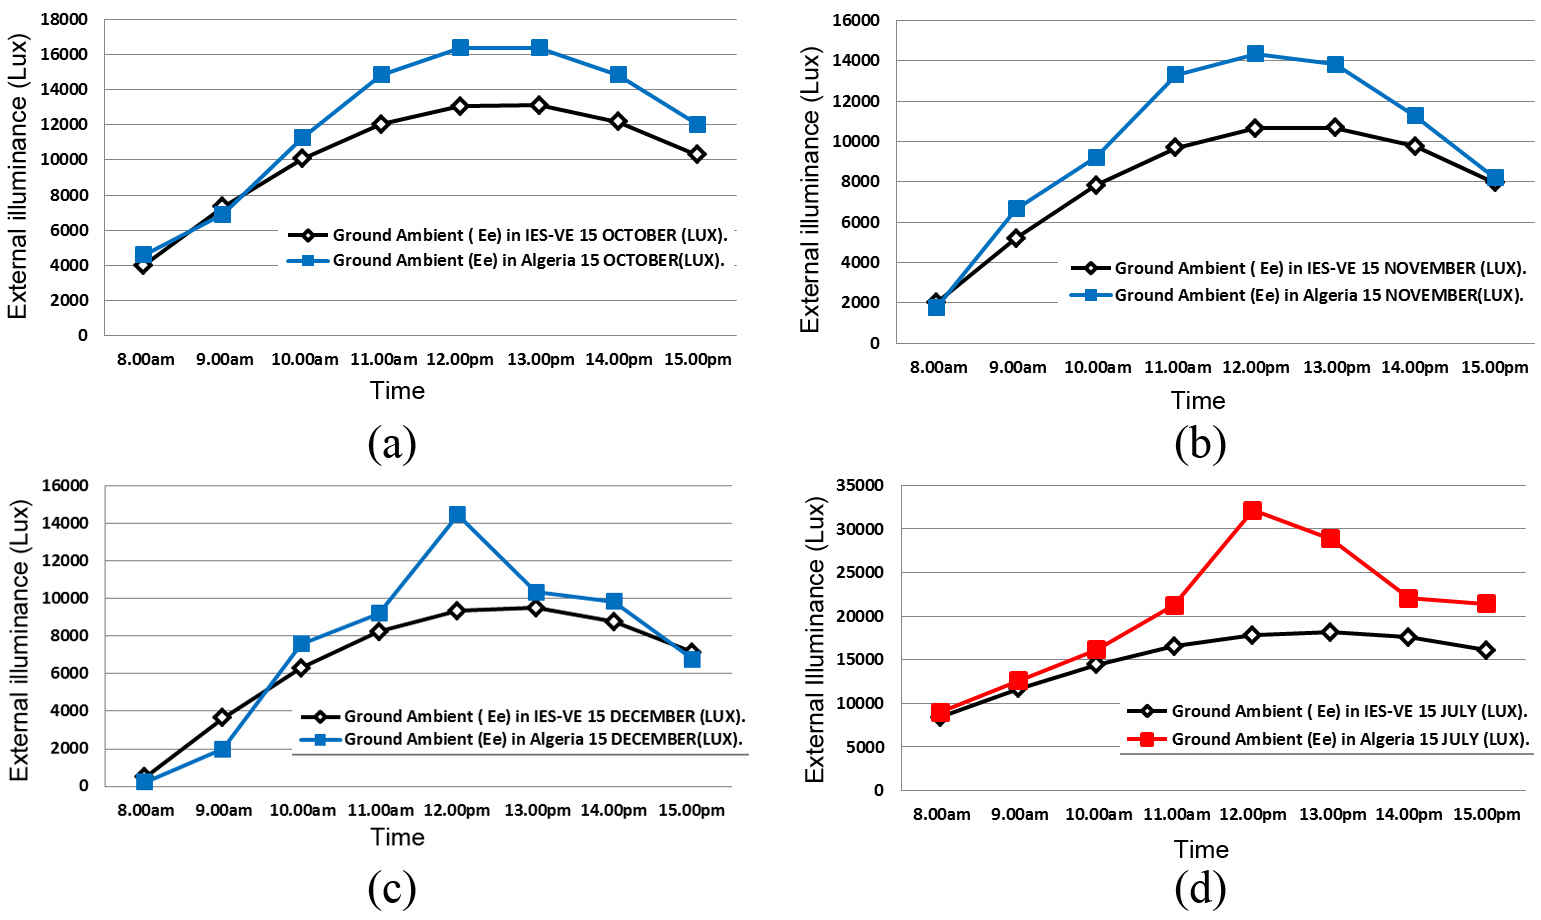 Comparison between IESVE outdoor illuminance simulation and field measurement of outdoor illuminance on 15 (a) October, (b) November, (c) December, and (d) July.